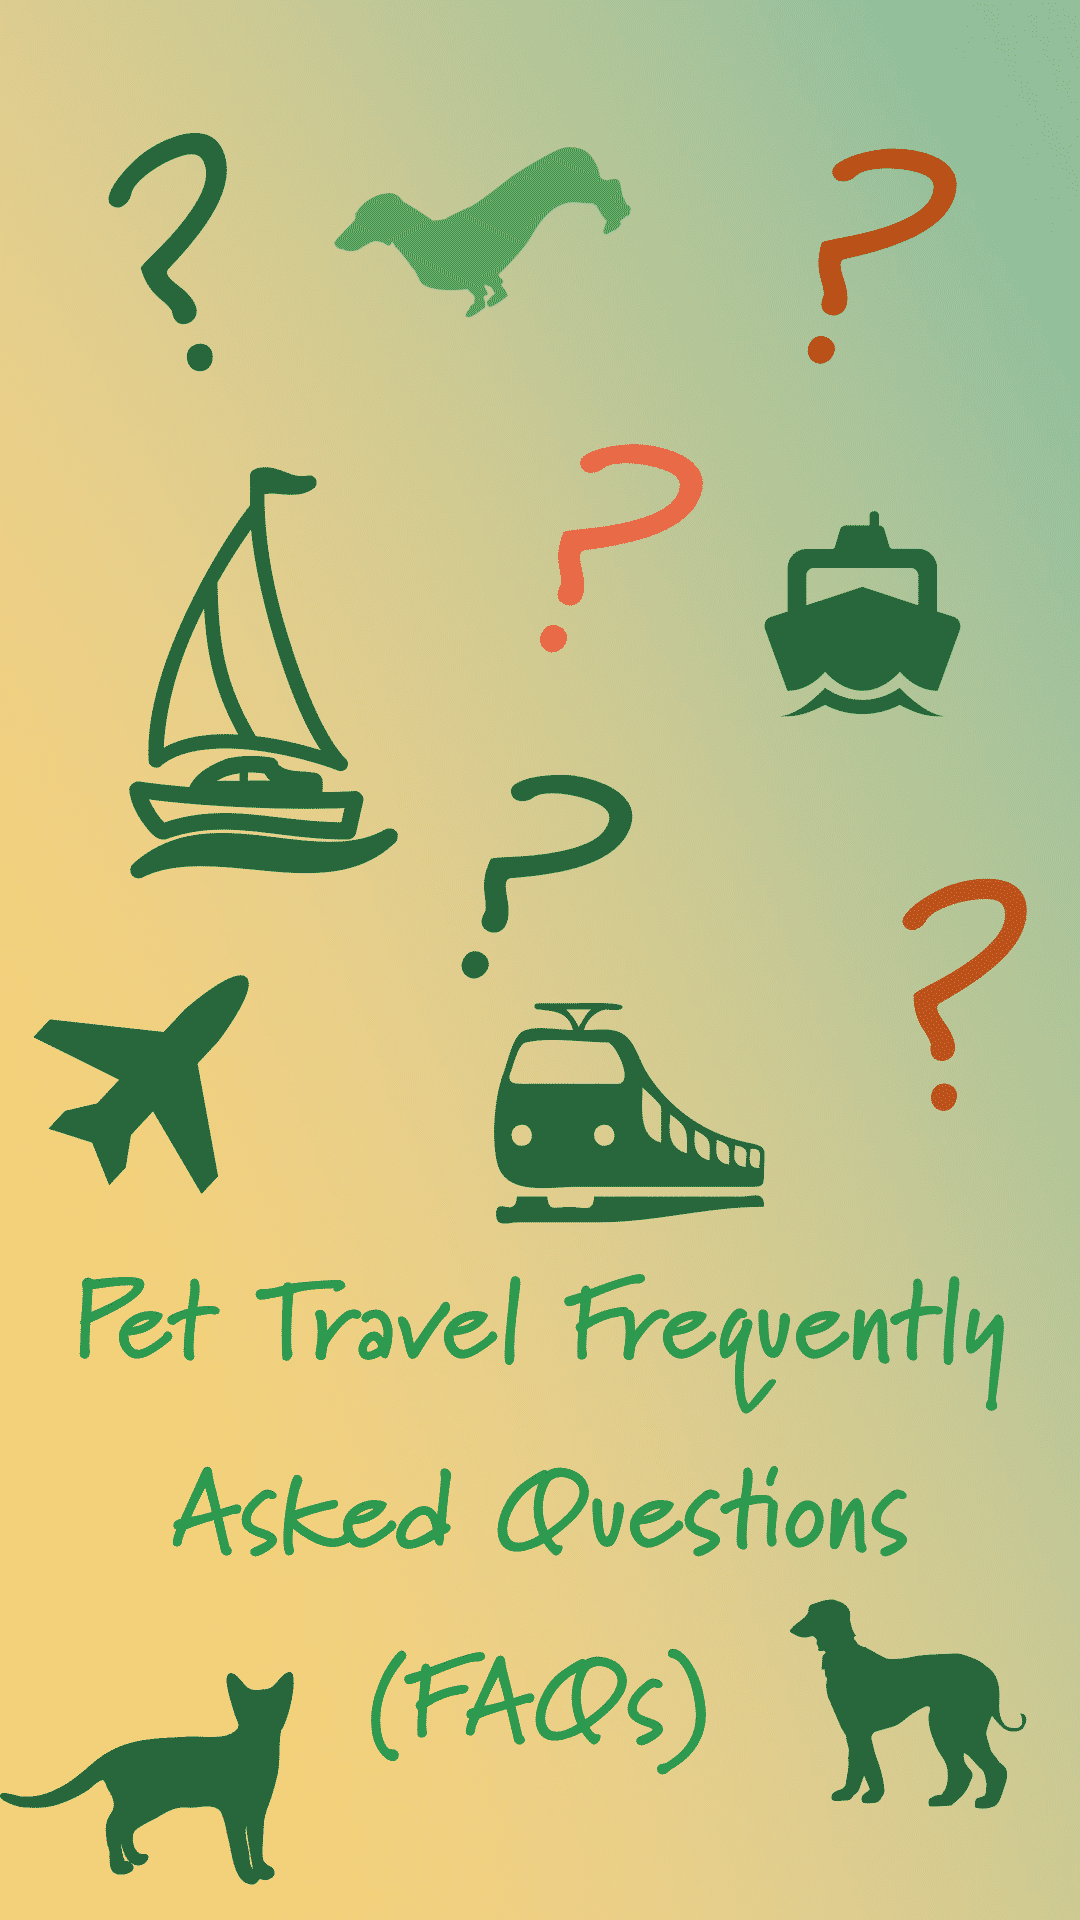 pet travel frequently asked questions faq